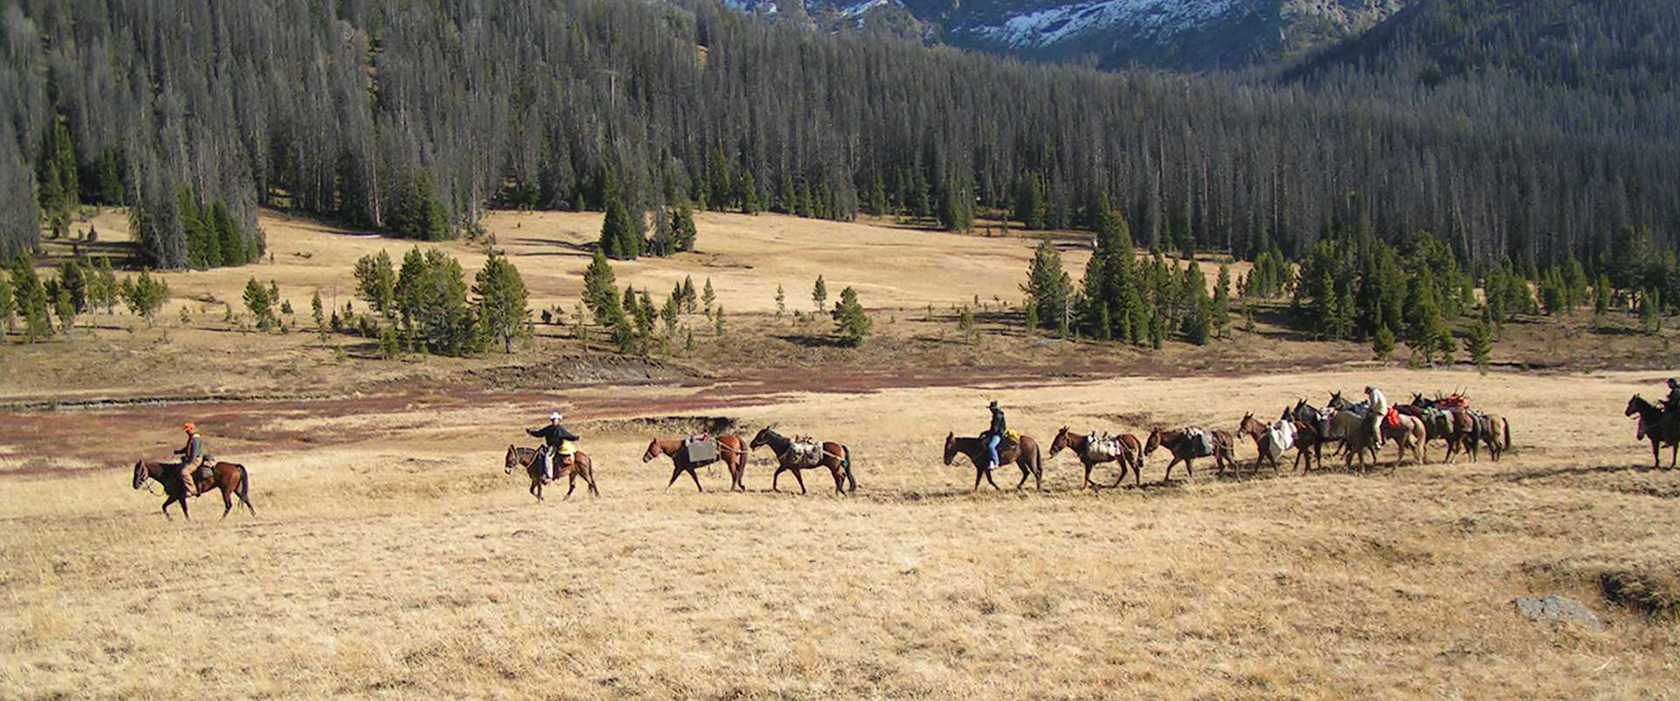 ranch real estate, WY/ranch real estate for sale